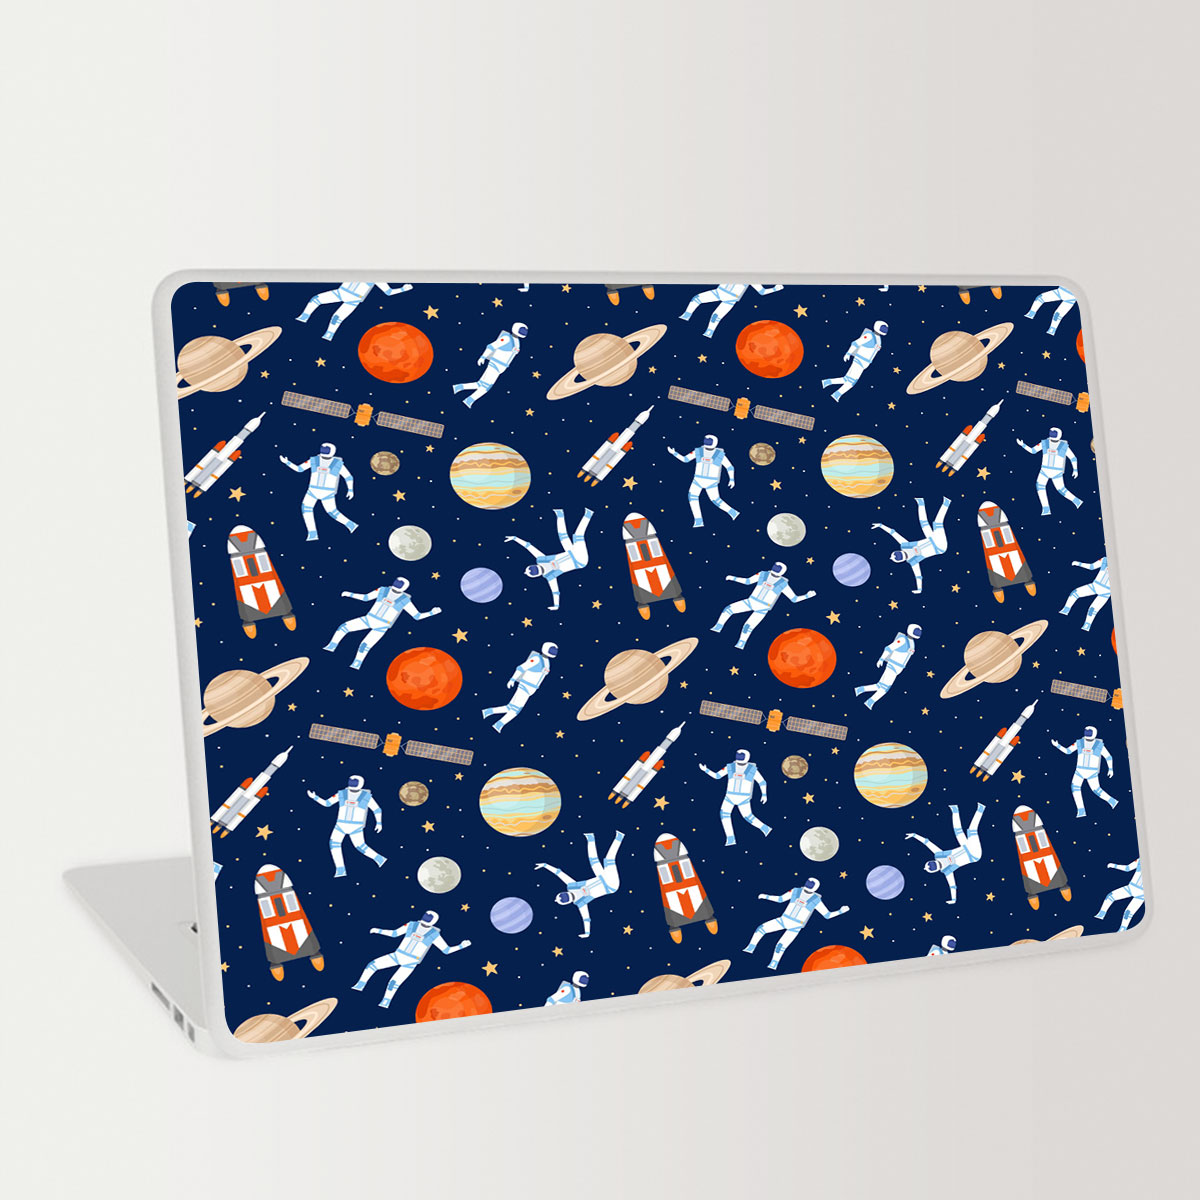 Outer Space Astronaut Laptop Skin